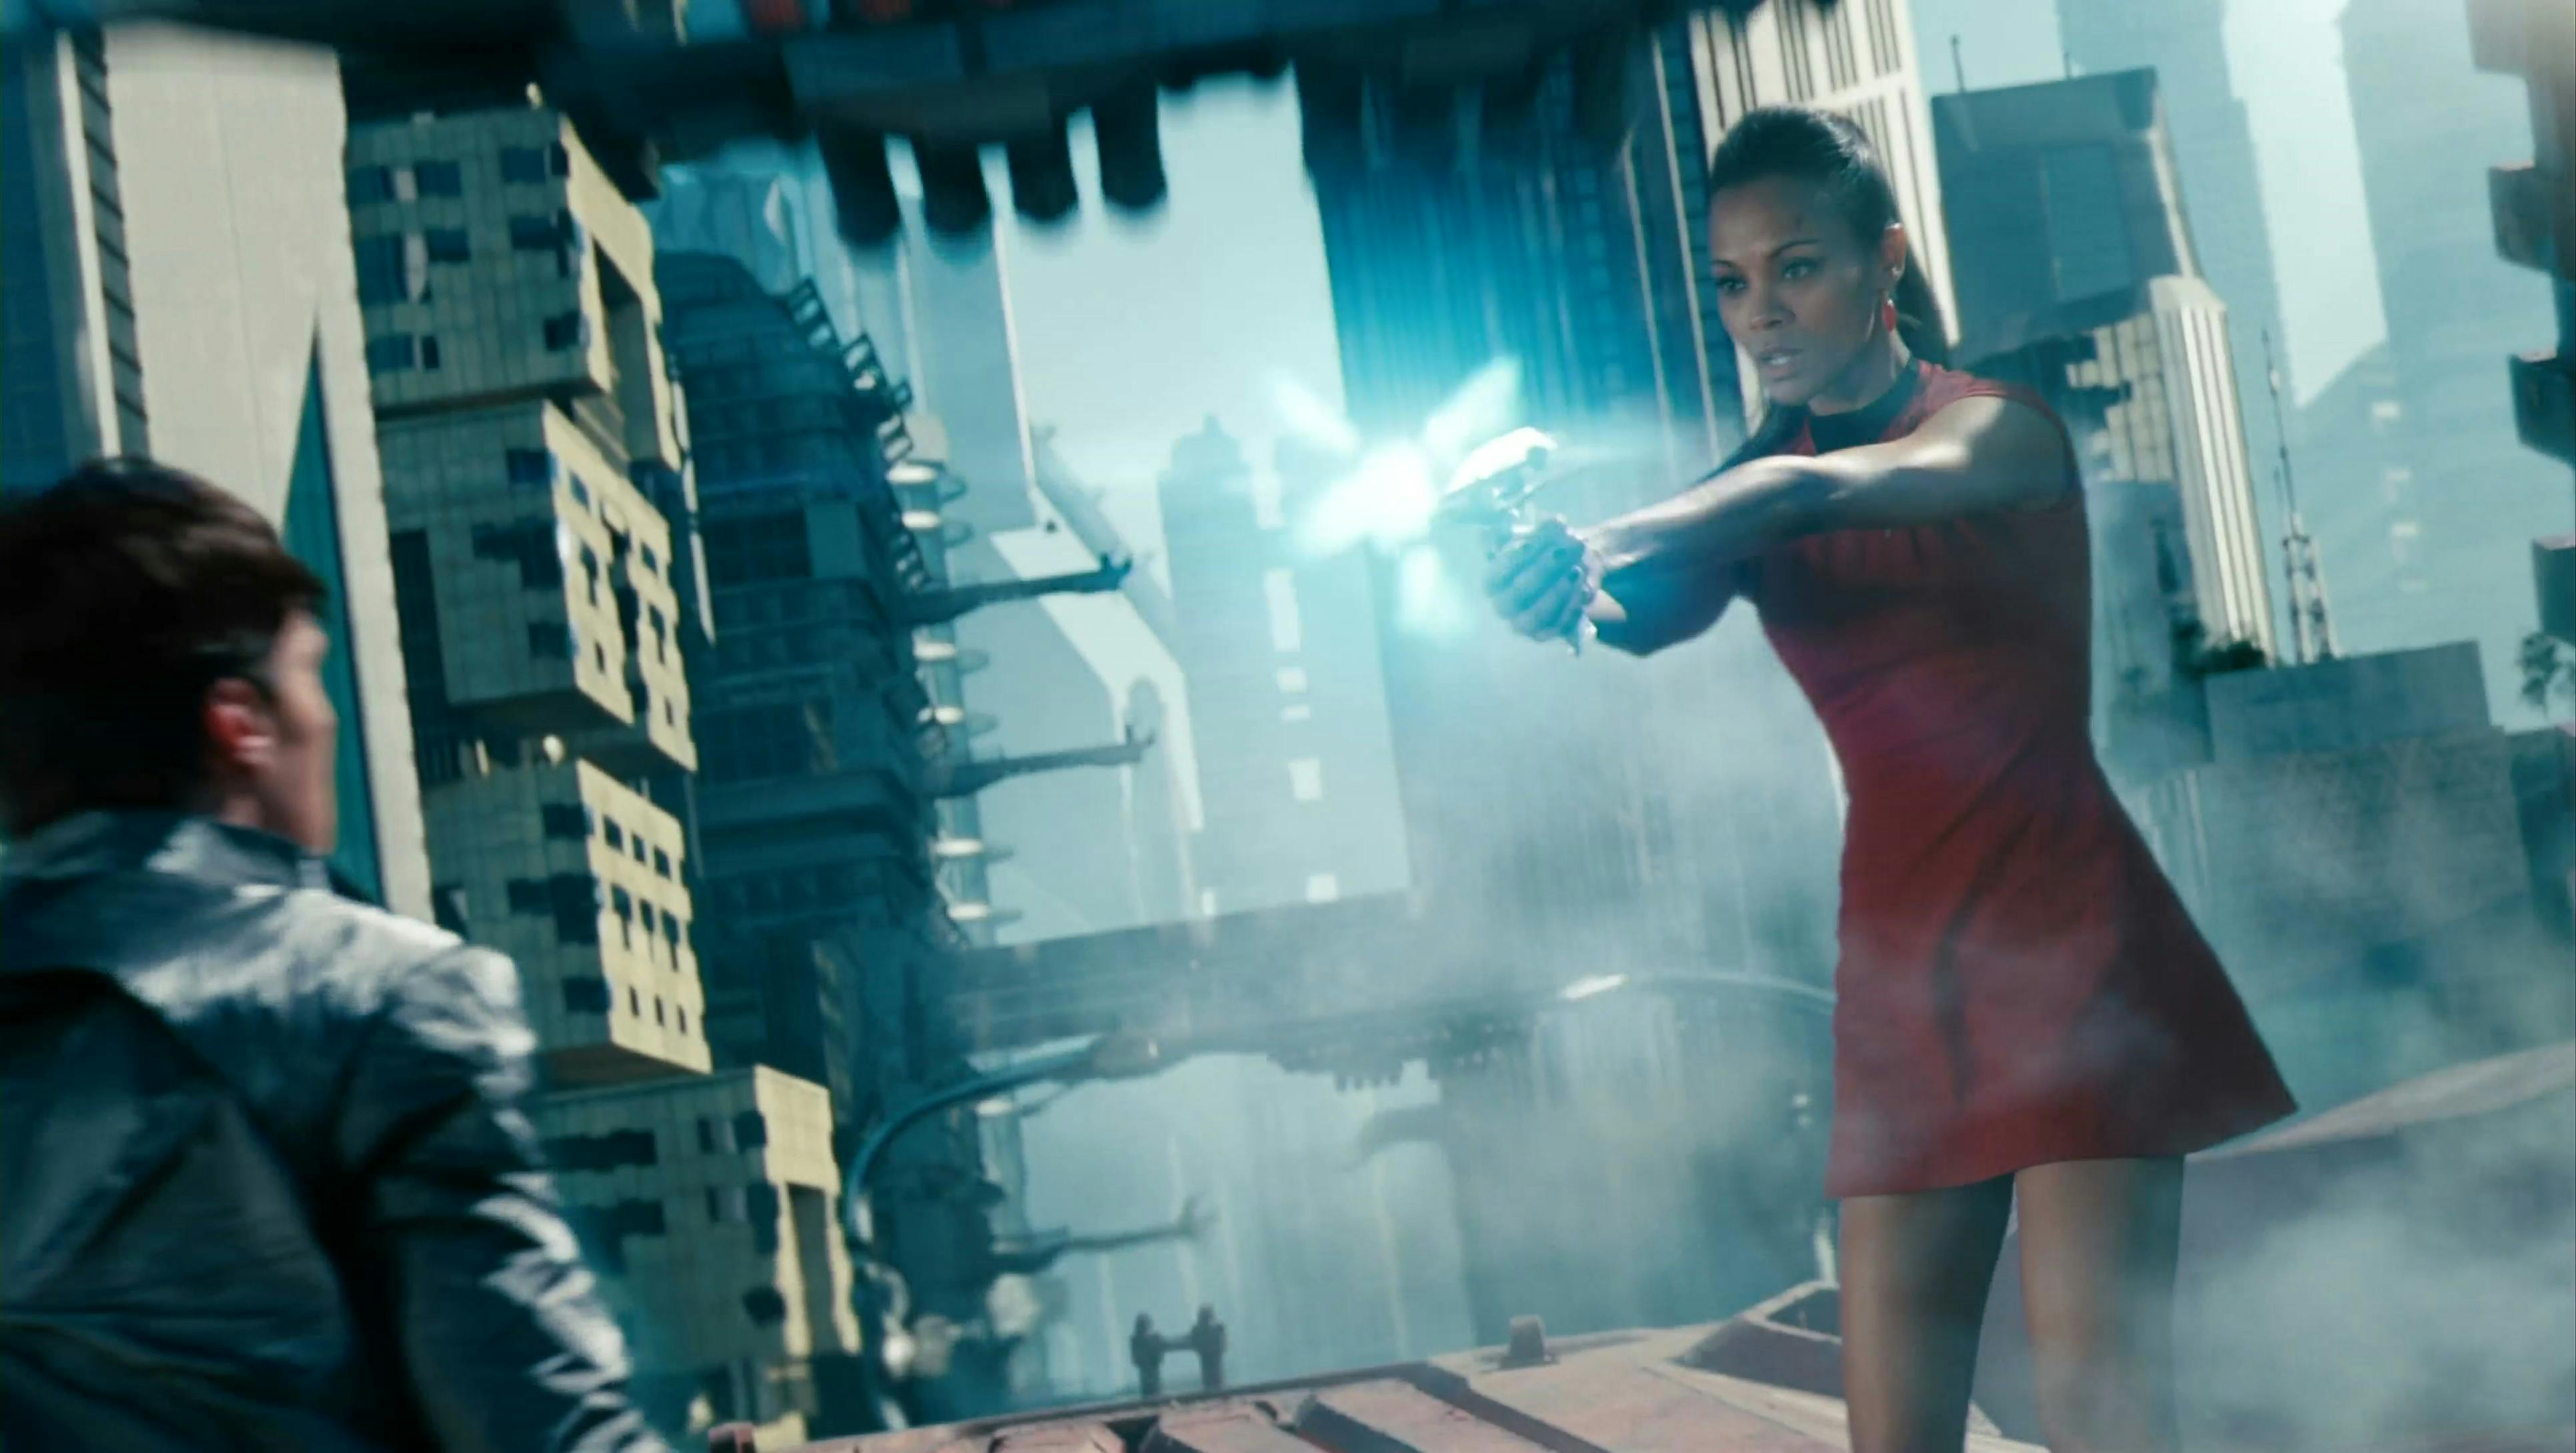 On the roof of a moving train, Uhura fires her phaser at Khan as he brawled with Spock in Star Trek Into Darkness